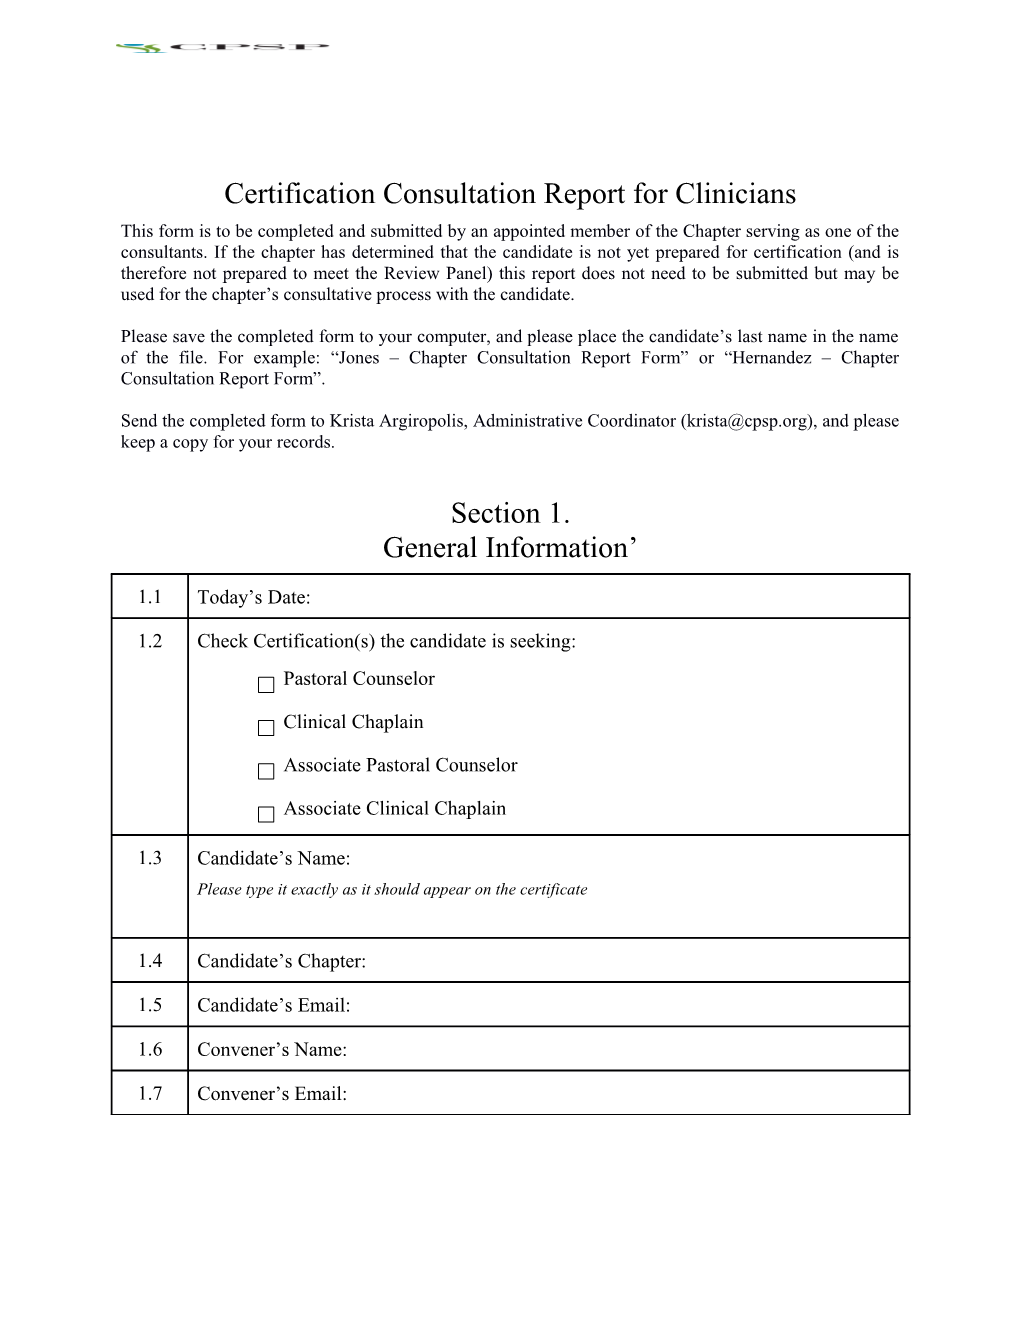 Certification Consultation Report for Clinicians